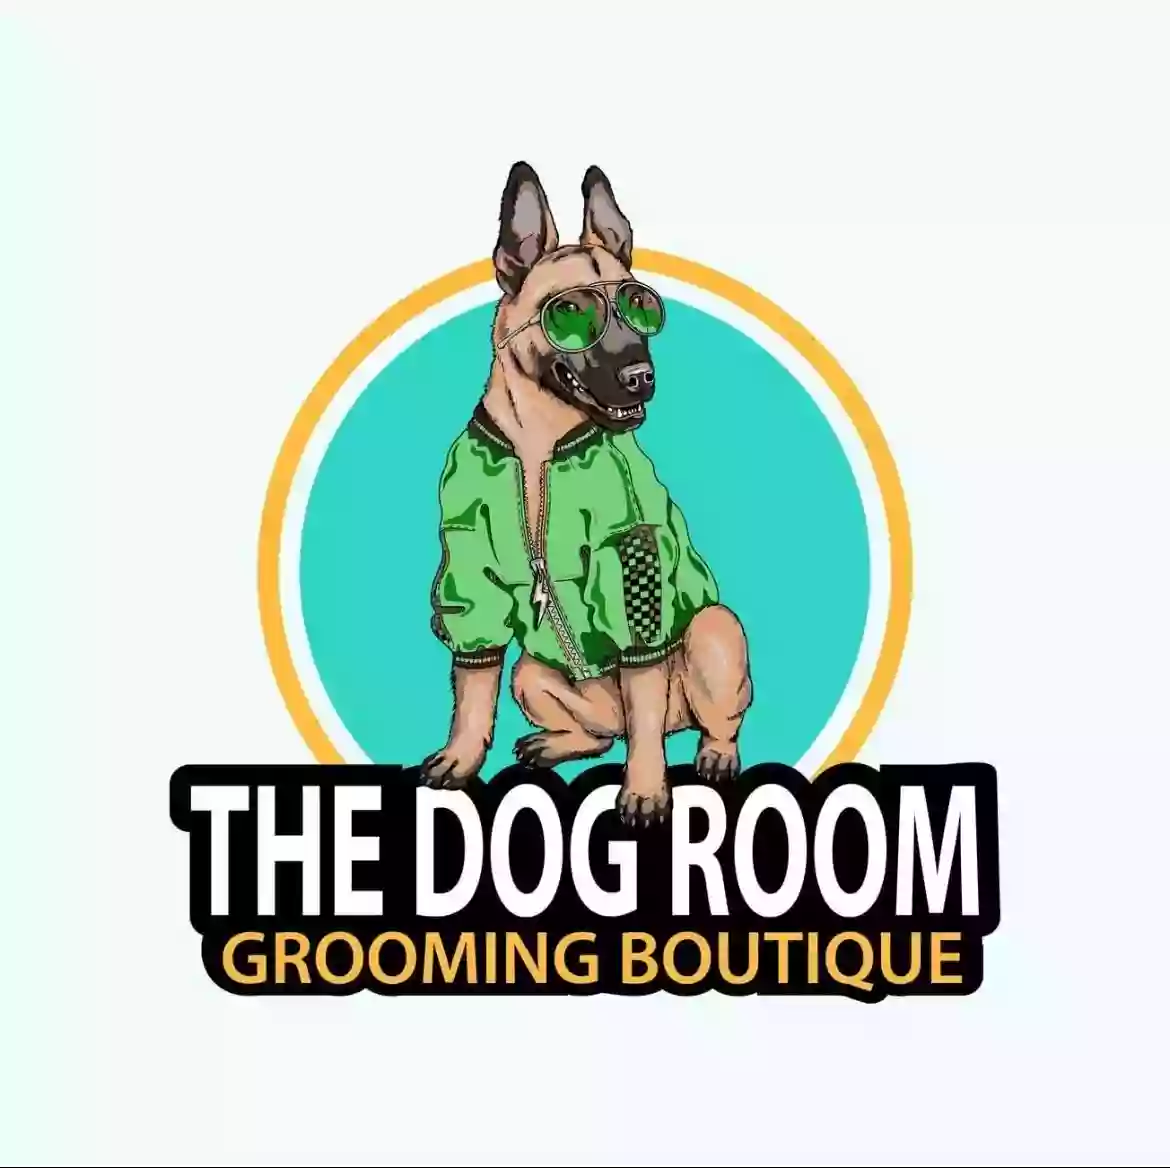 The Dog Room Grooming Boutique